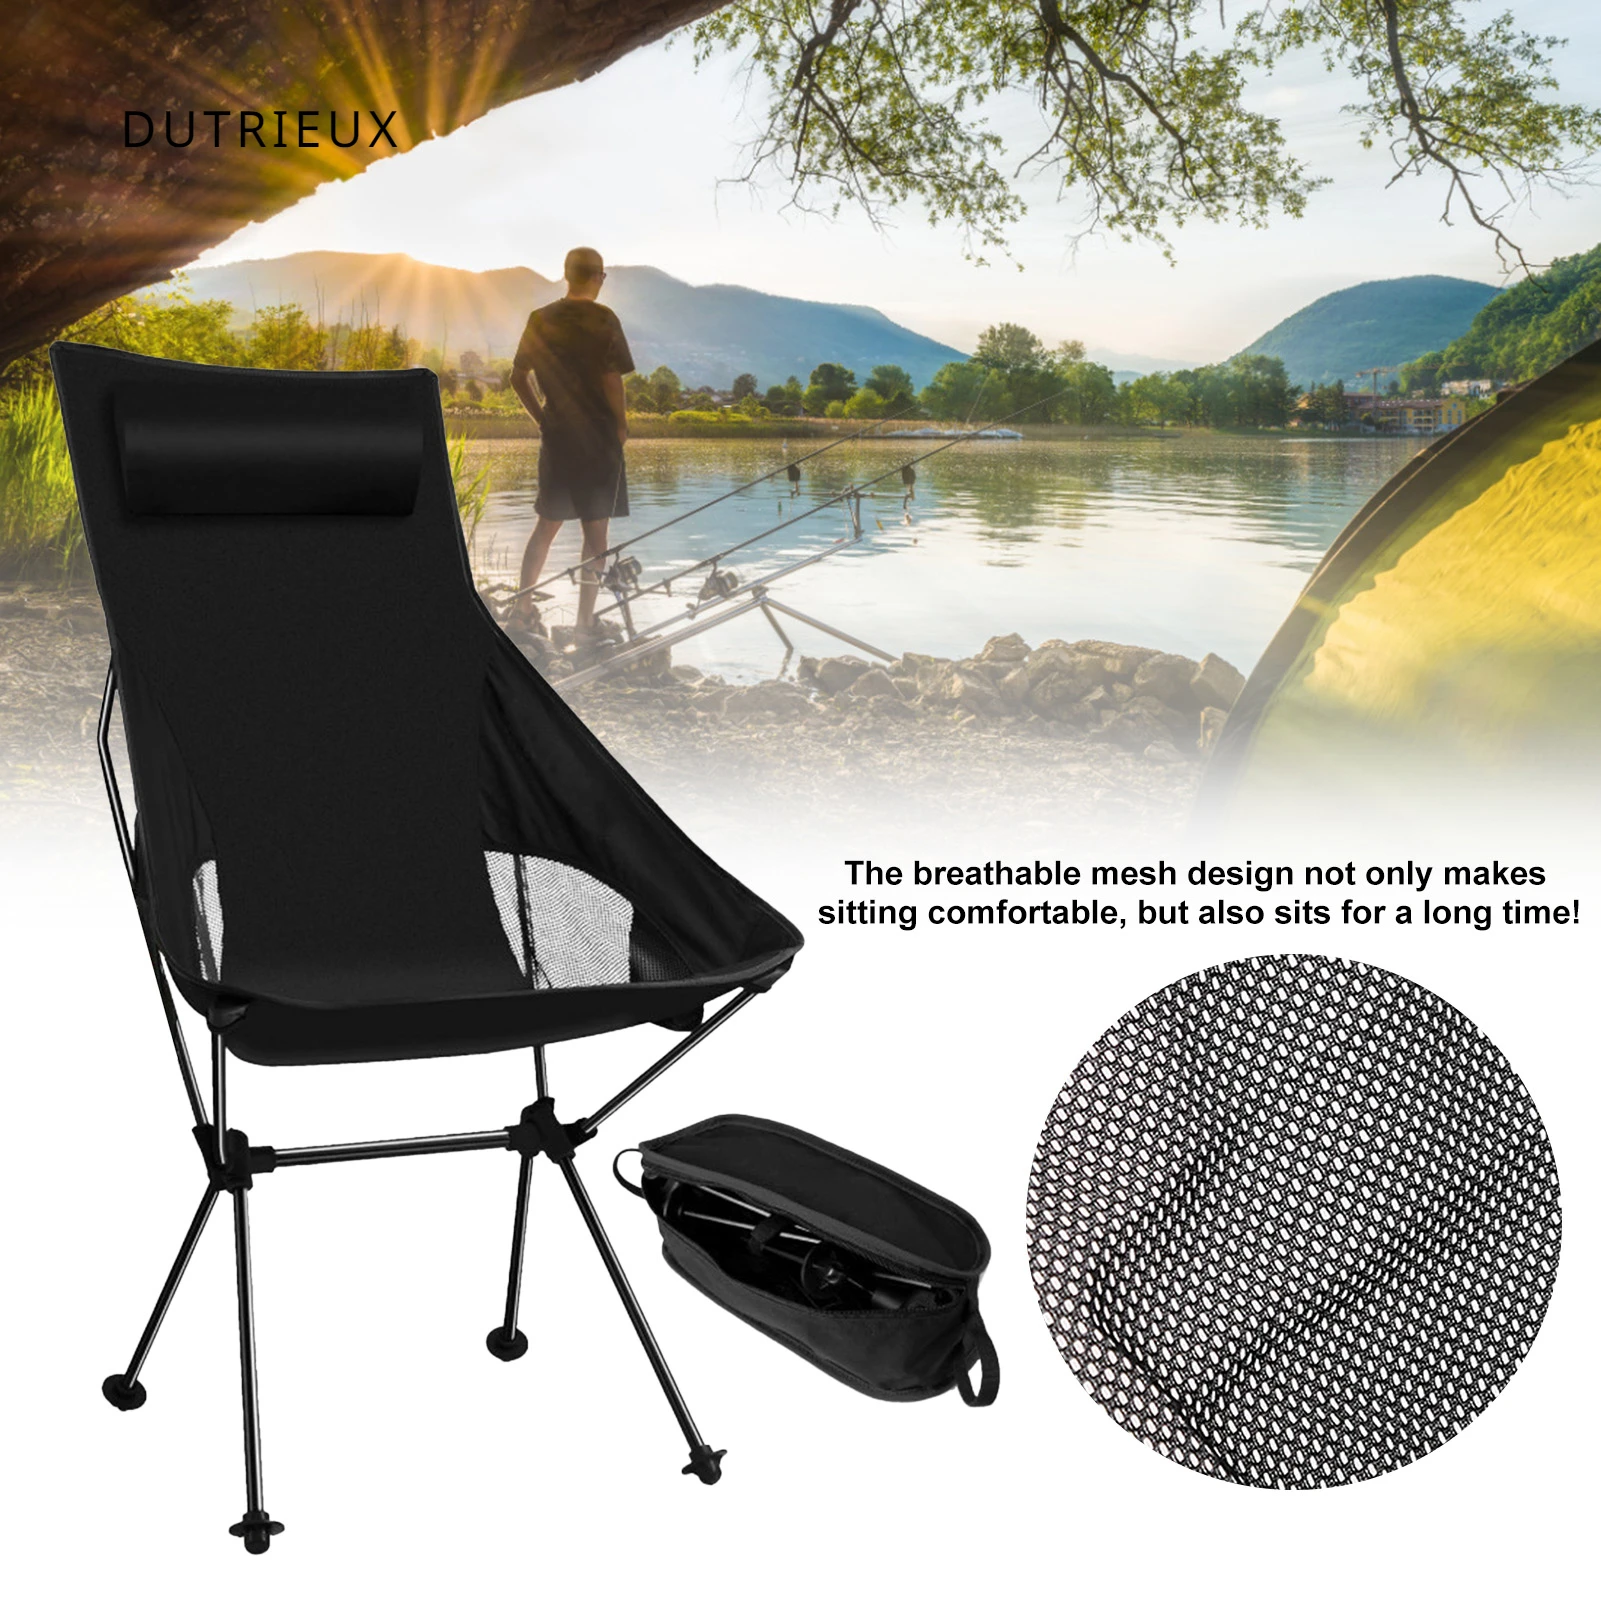 

New Outdoor Moon Chair Lightweight Fishing Camping BBQ Chairs Portable Folding Extended Hiking Seat Garden Ultralight Backpackin